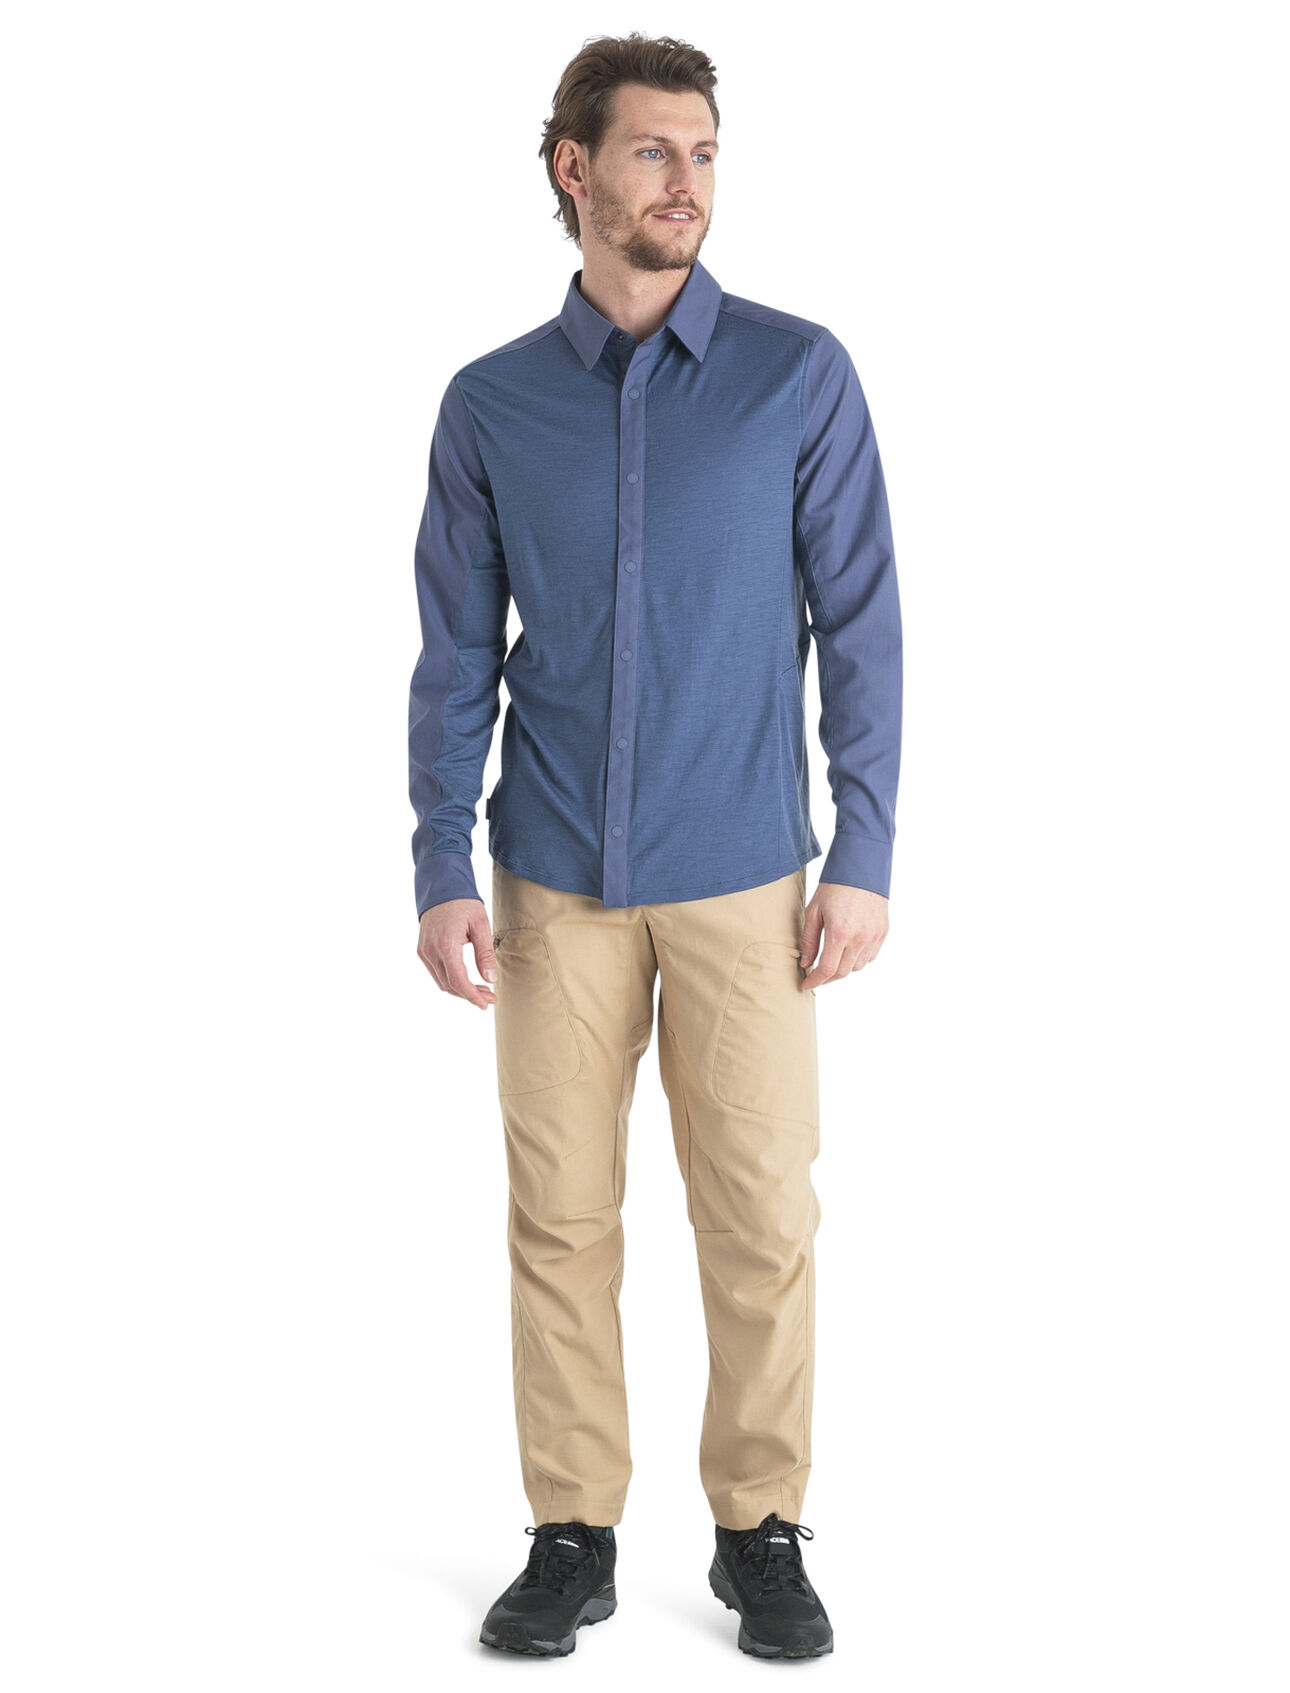 Mens Merino Hike Long Sleeve Top A lightweight and breathable merino shirt ideal for mountain adventures, the Hike Long Sleeve Top also provides the casual style for whatever comes after.